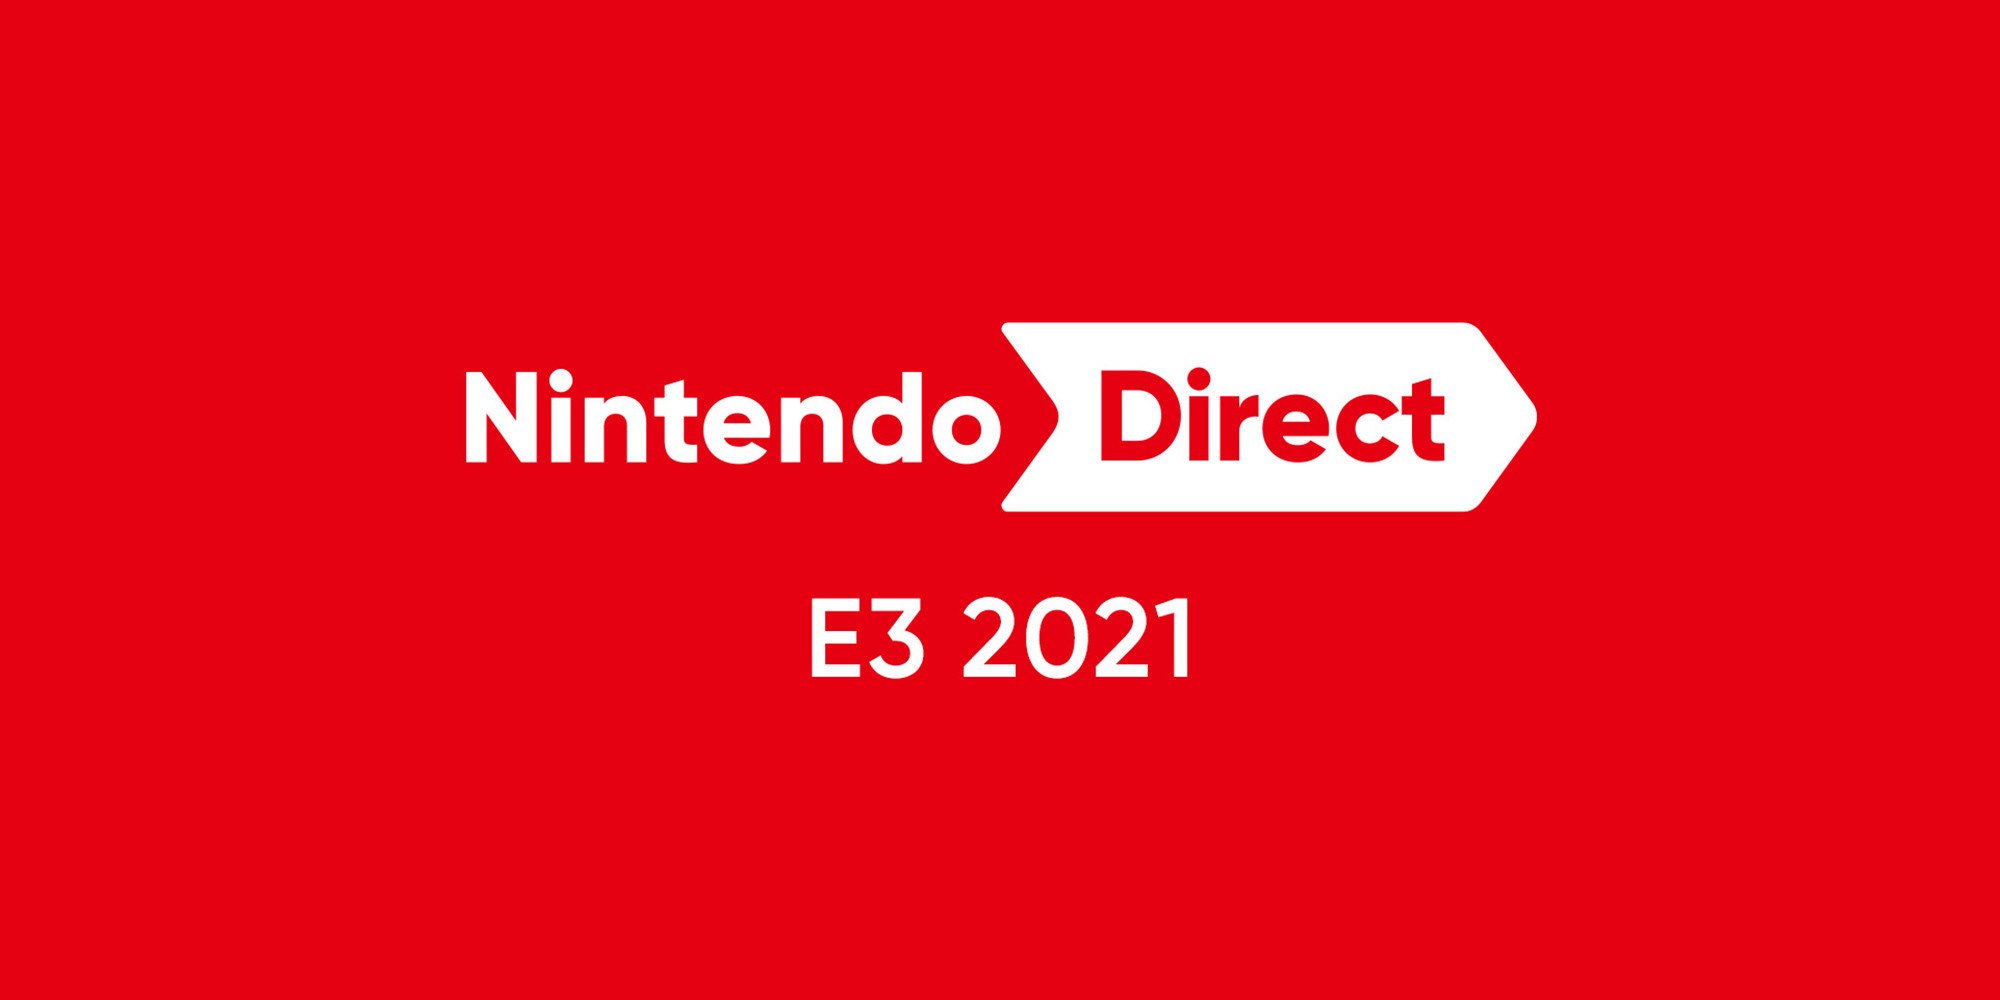 Nintendo Direct E3 2021 conference gets date but will be Switch software only